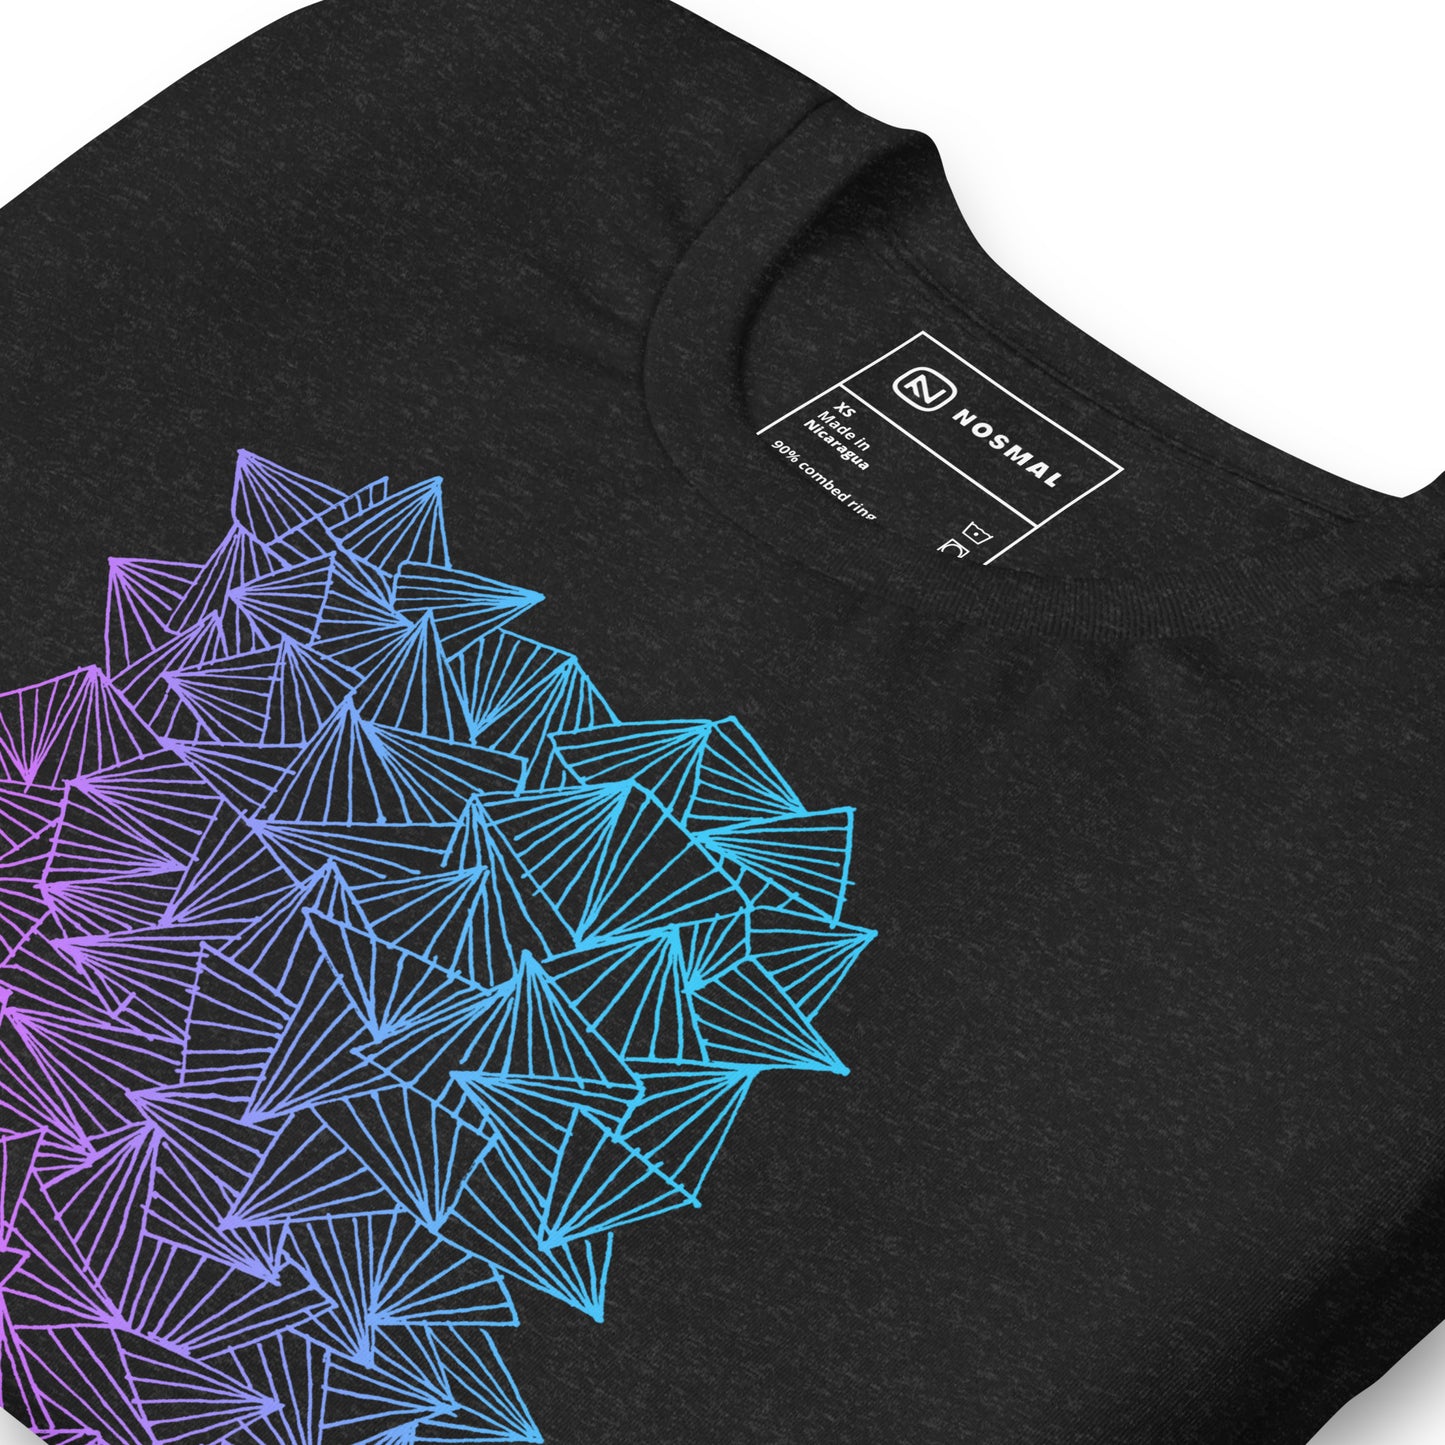 Angled close up shot of gaggle of triangles gradient design on heather black unisex t-shirt.